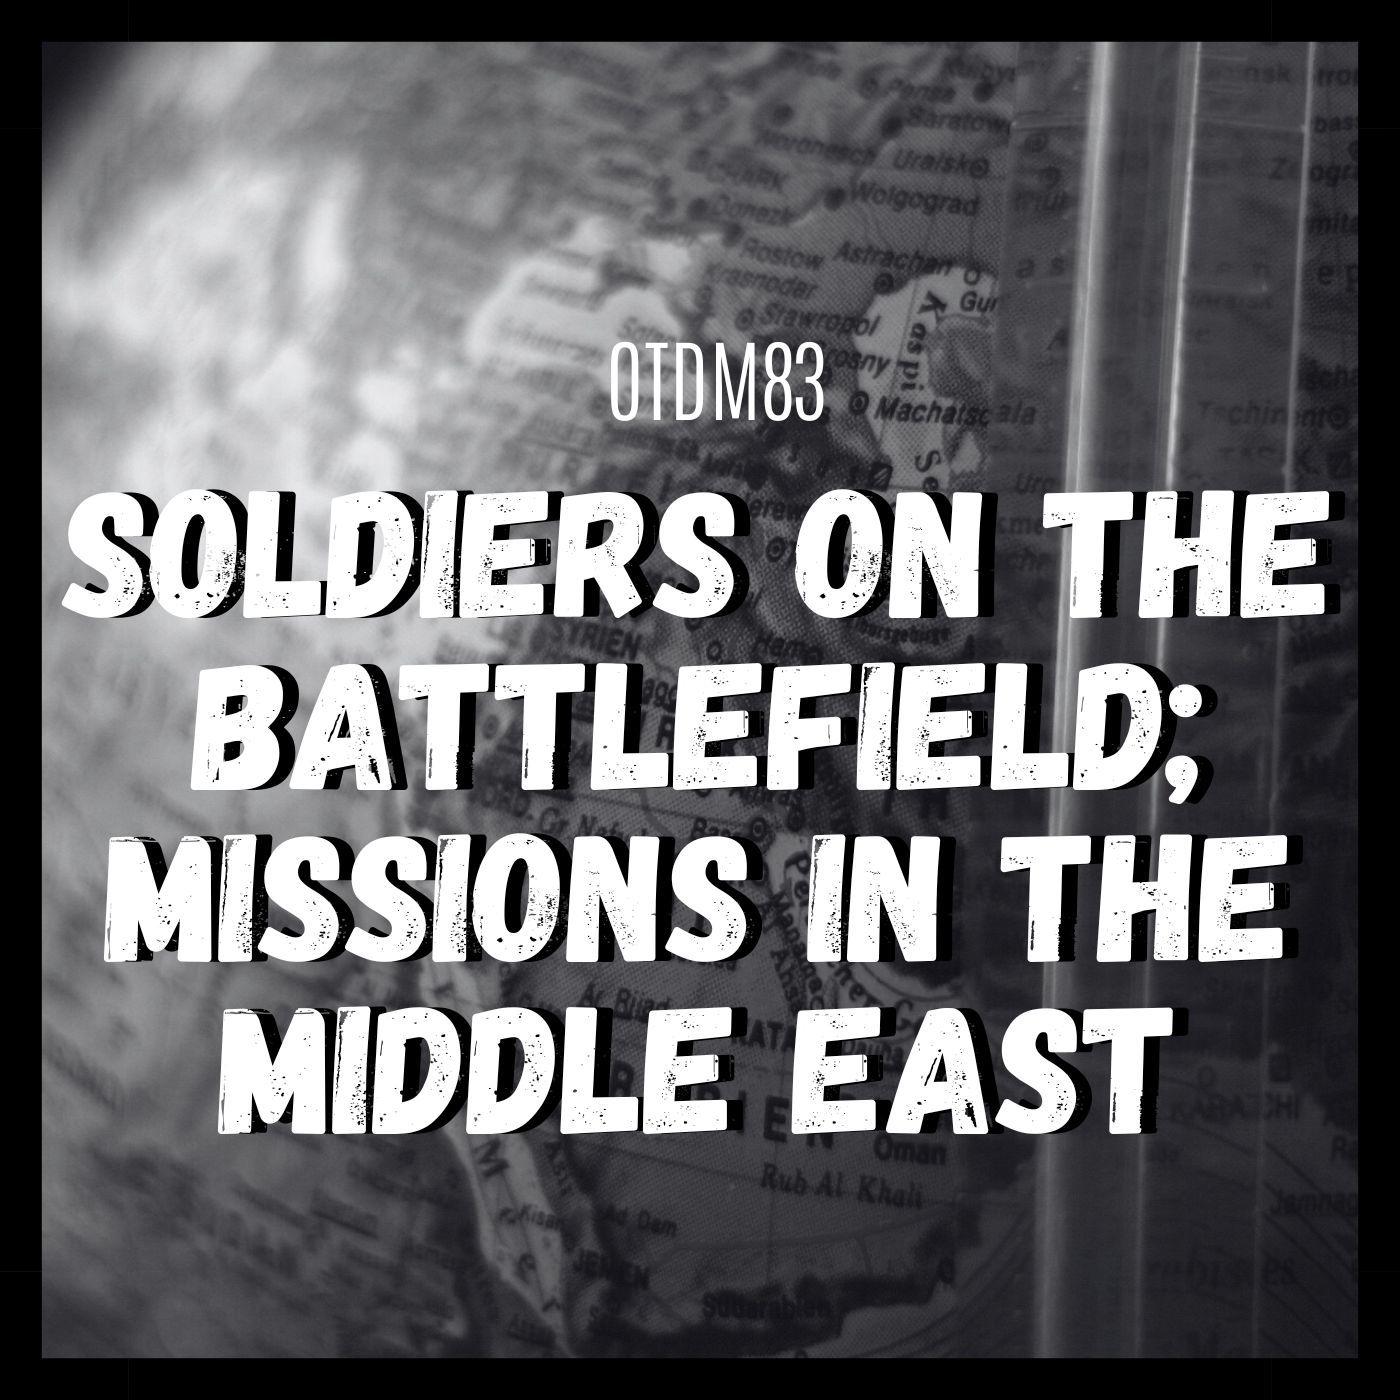 OTDM83 Soldiers on the battlefield; Missions in the Middle East